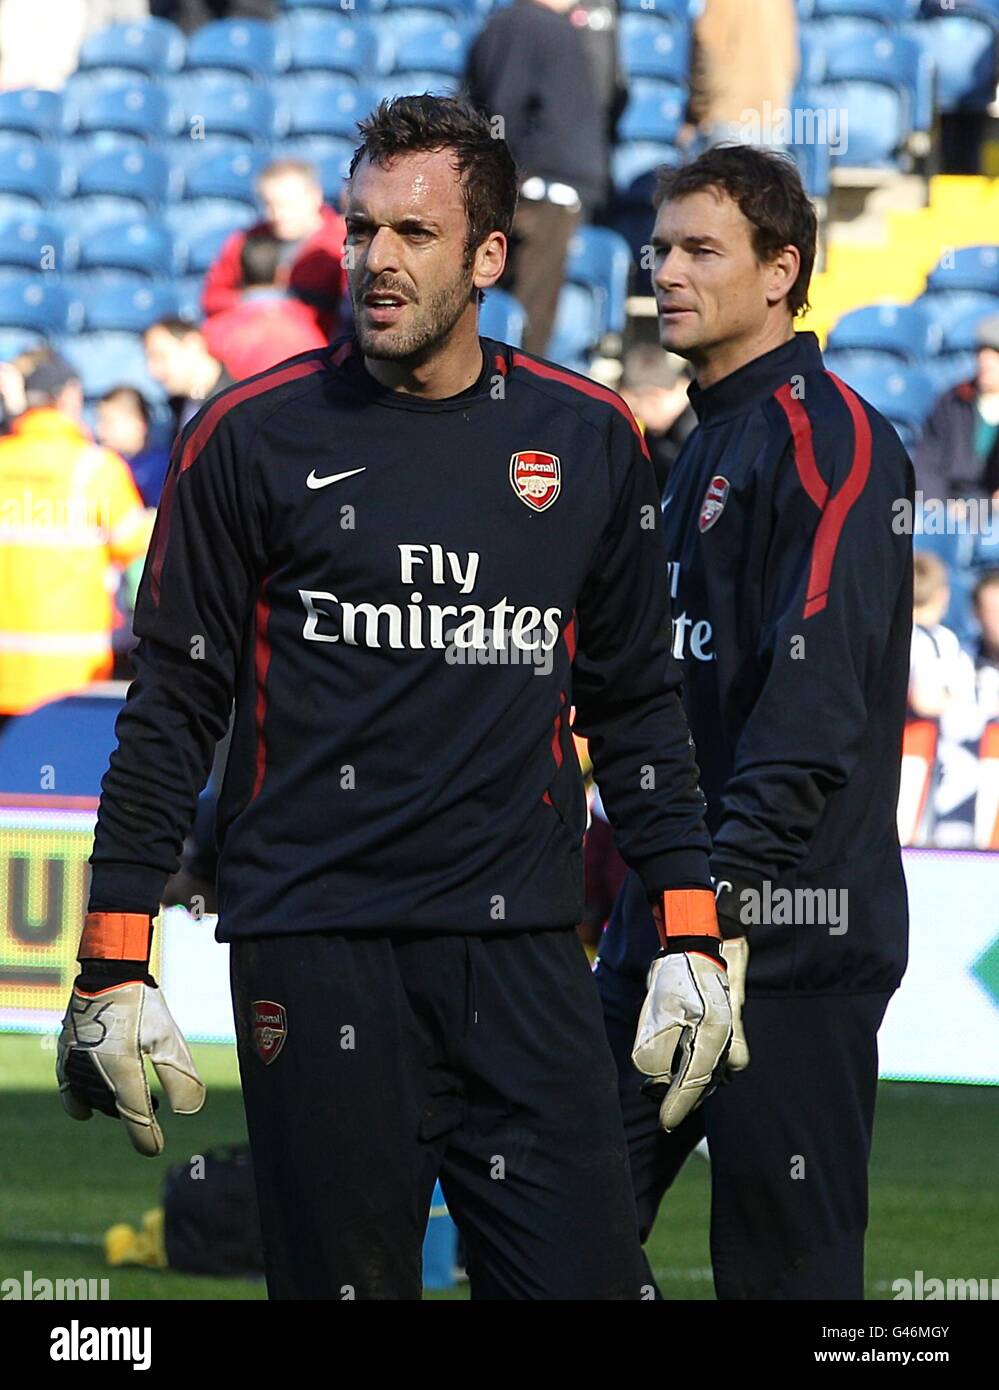 Soccer - Barclays Premier League - West Bromwich Albion v Arsenal - The Hawthorns. Arsenal's goalkeeper Manuel Almunia (left) and Jens Lehmann (right) prior to kick off Stock Photo